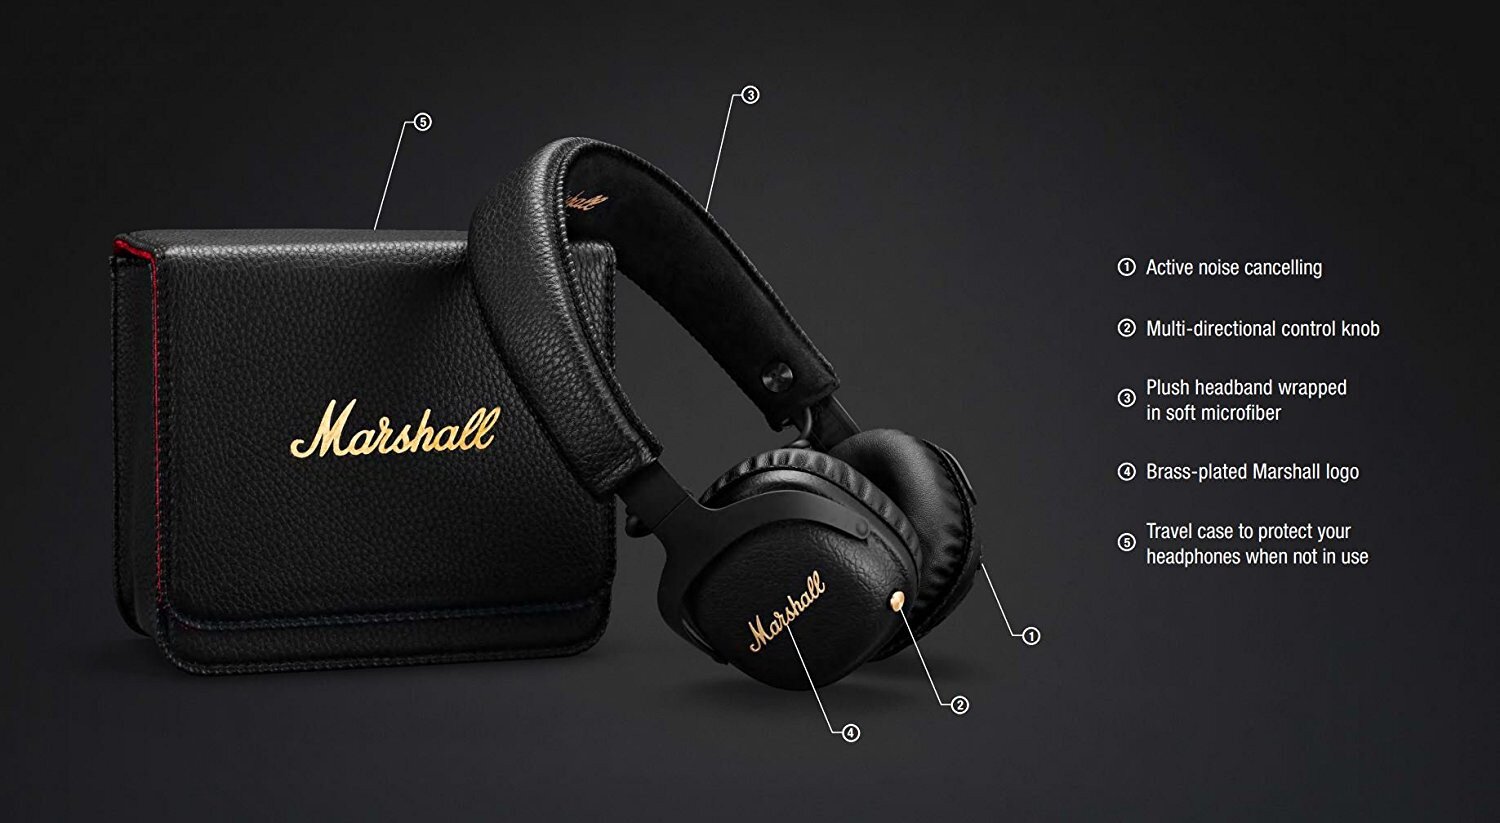 Marshall Mid ANC Active Noise Cancelling On-Ear Wireless Bluetooth  Headphone, Black (04092138)